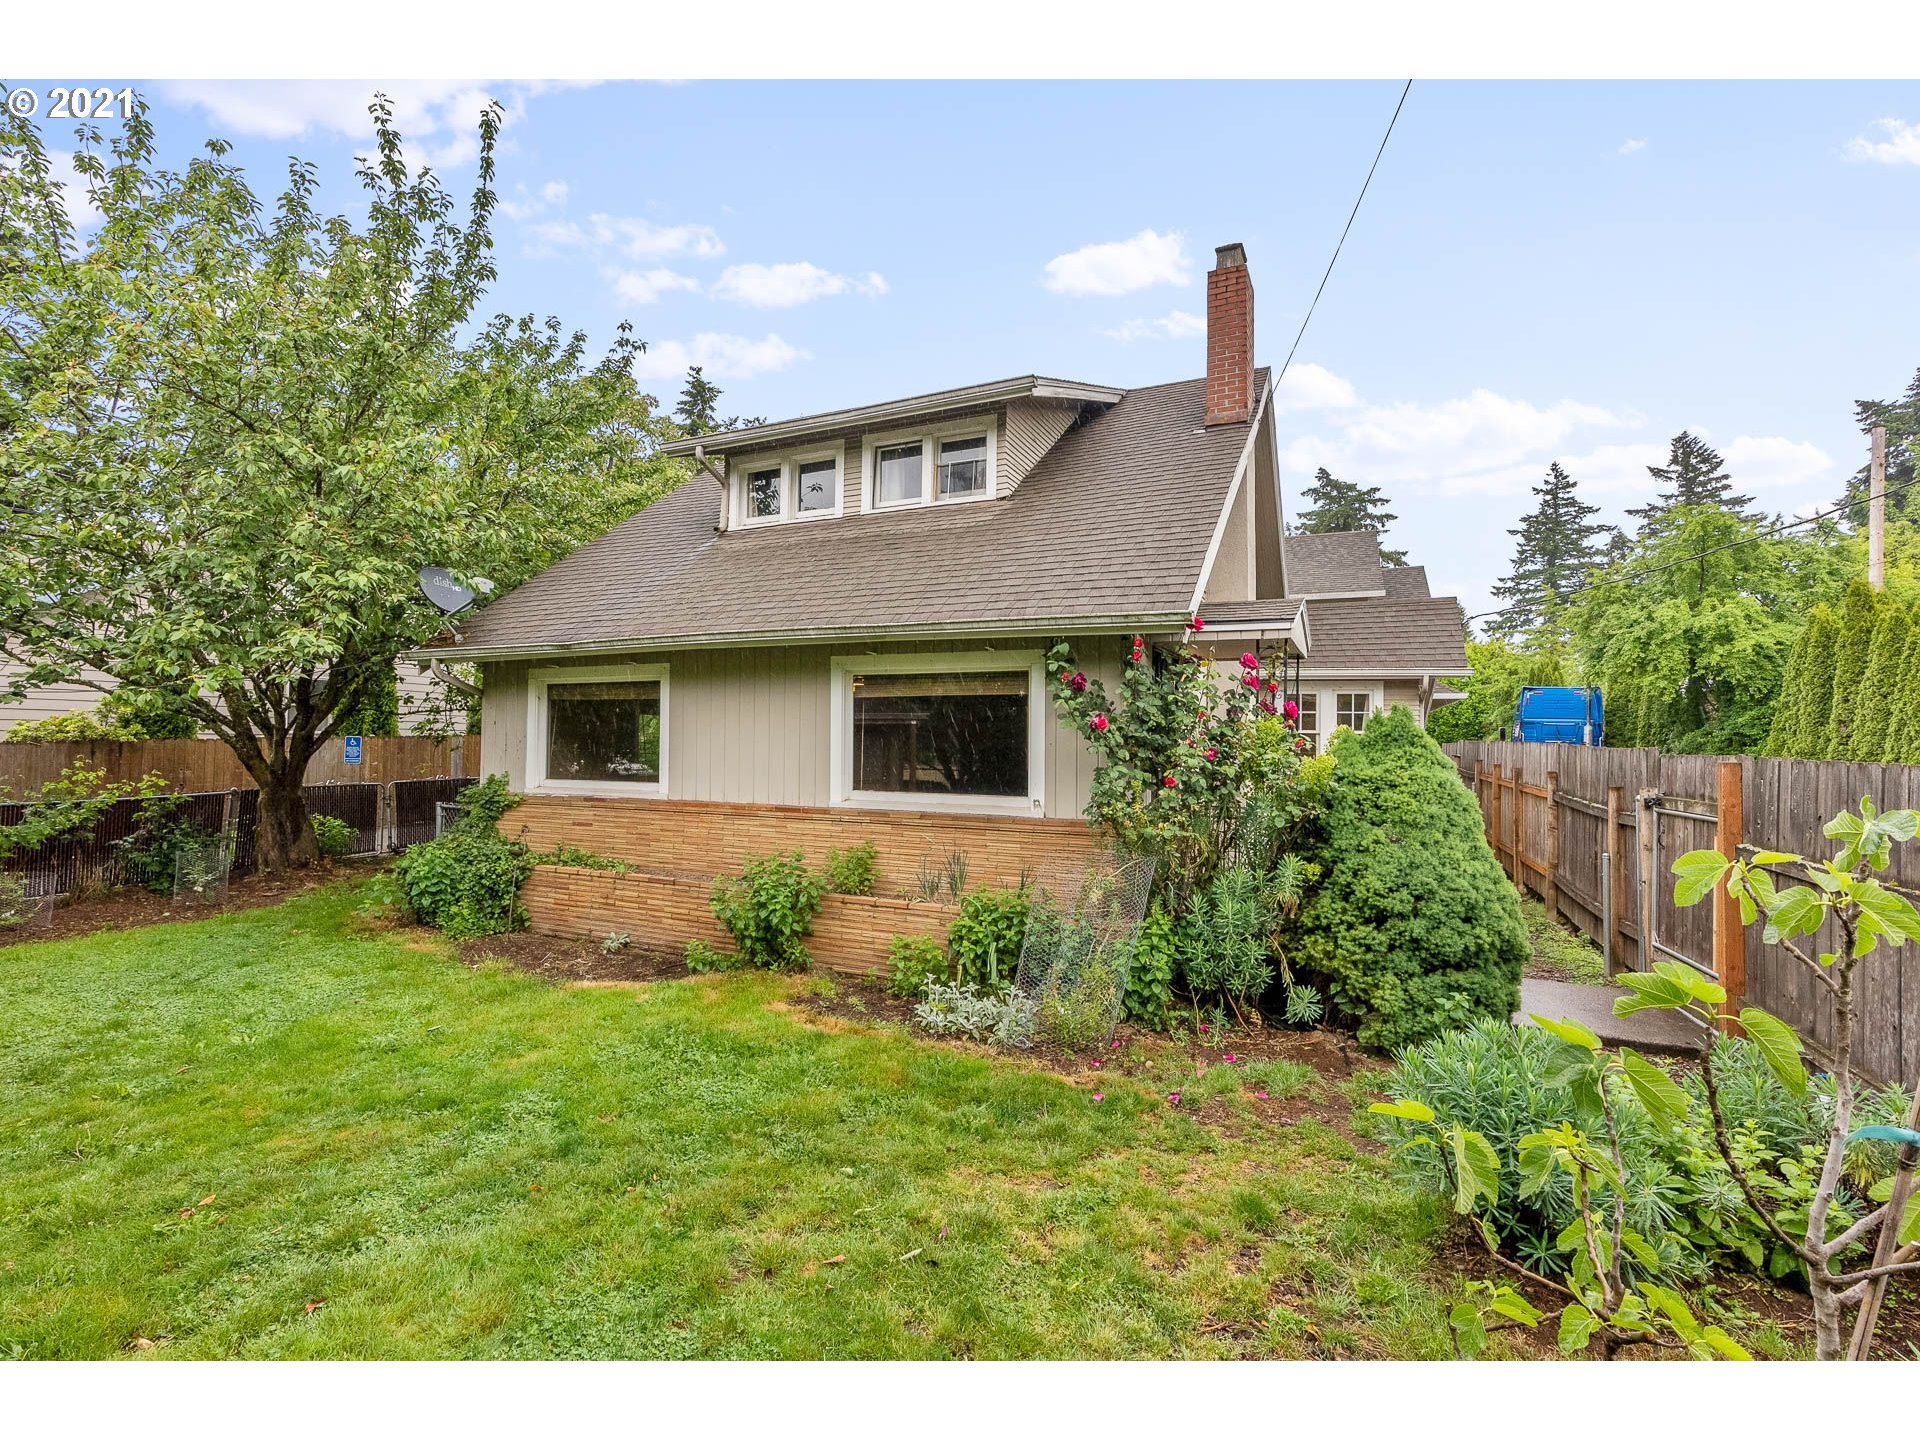 2616 SE 109TH AVE (1 of 31)